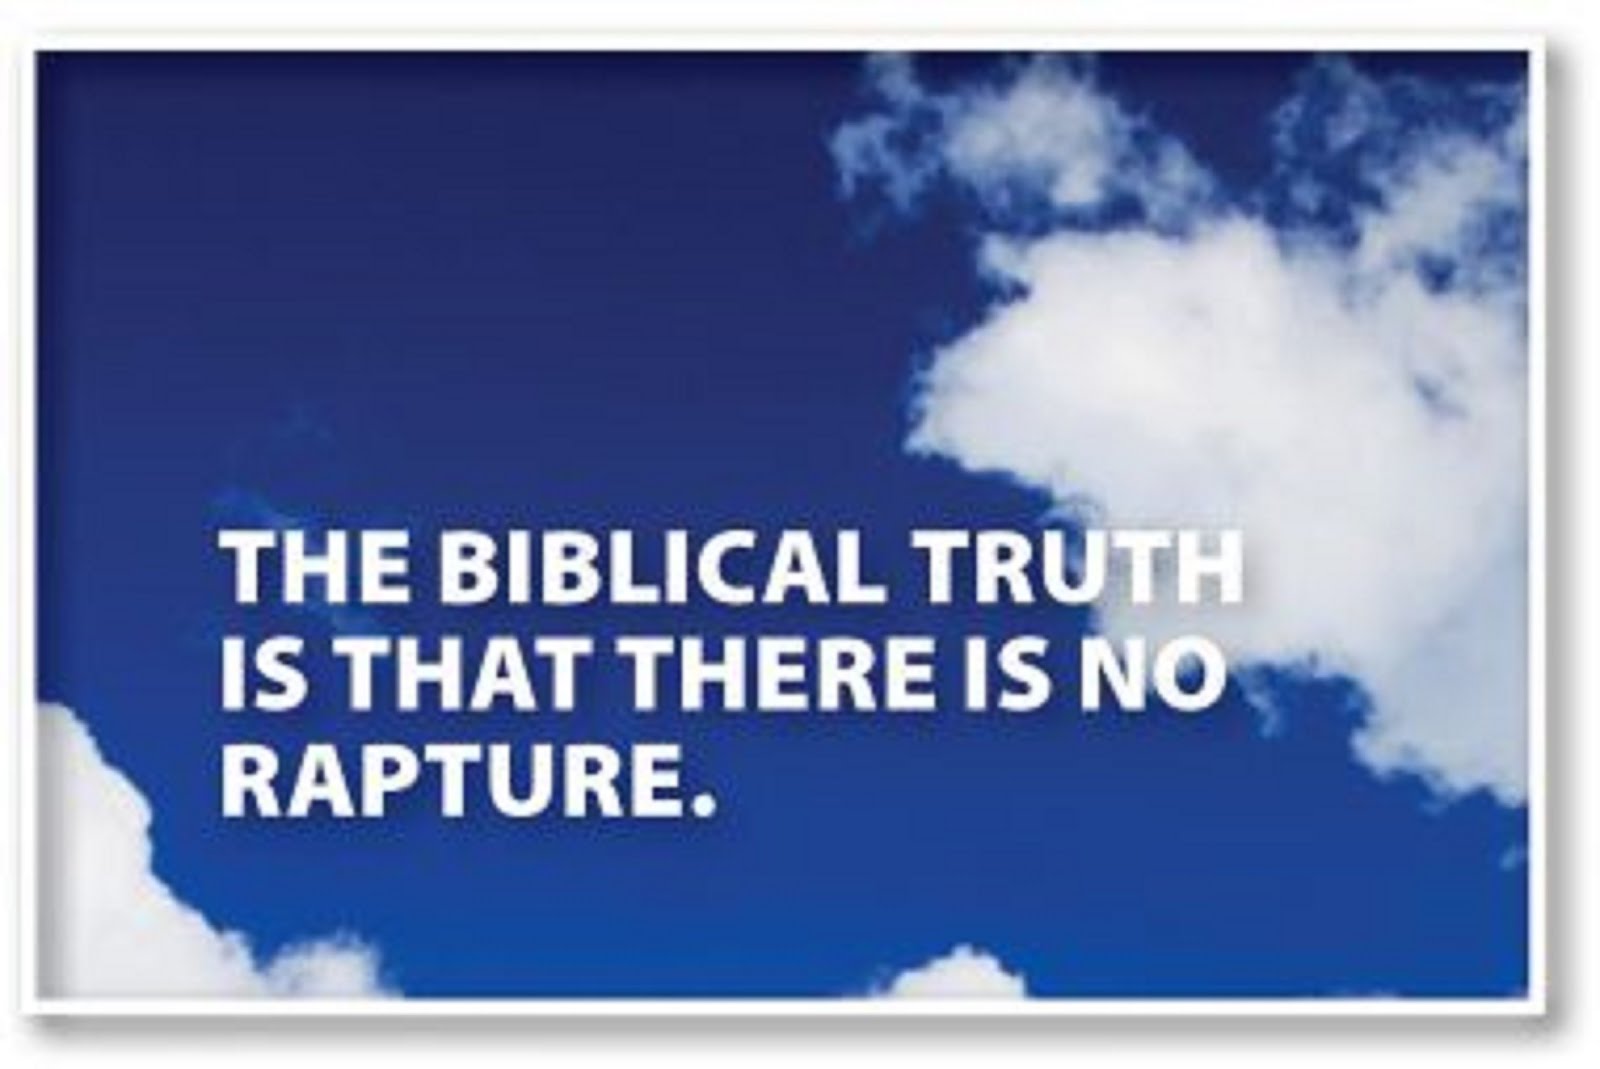 NO RAPTURE IS A BIBLICAL TRUTH